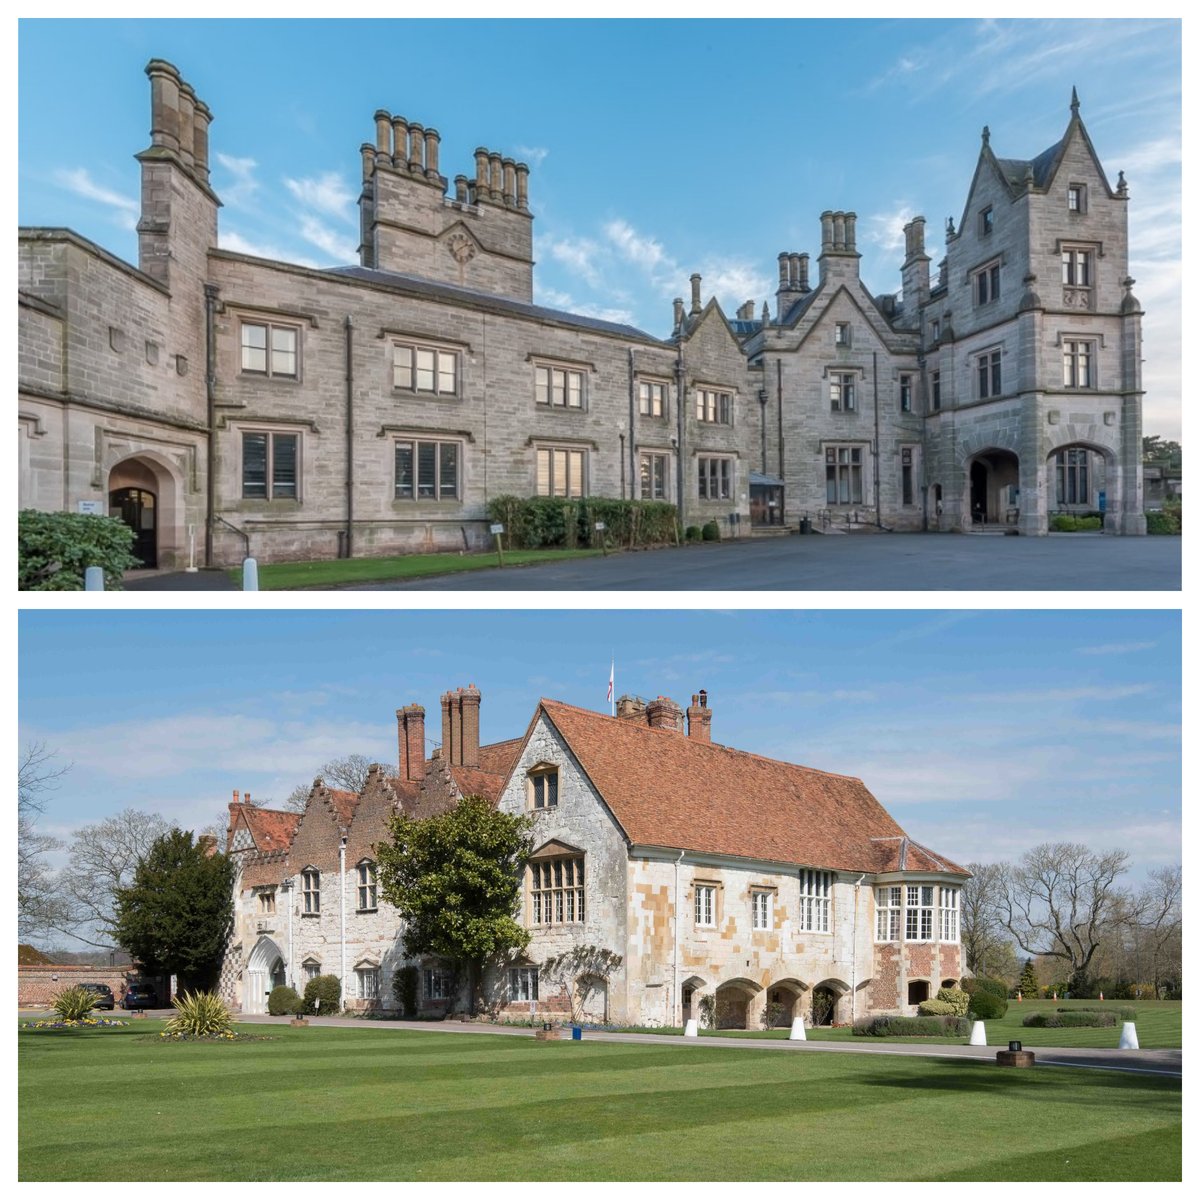 Congratulations to @LilleshallNSC and @BishamAbbeyNSC on achieving a remarkable one-two. Following their latest @HospAssured assessments, Lilleshall has been named as the highest scoring facility in the UK, with Bisham Abbey in the runners-up spot! @SercoGroup @Sport_England